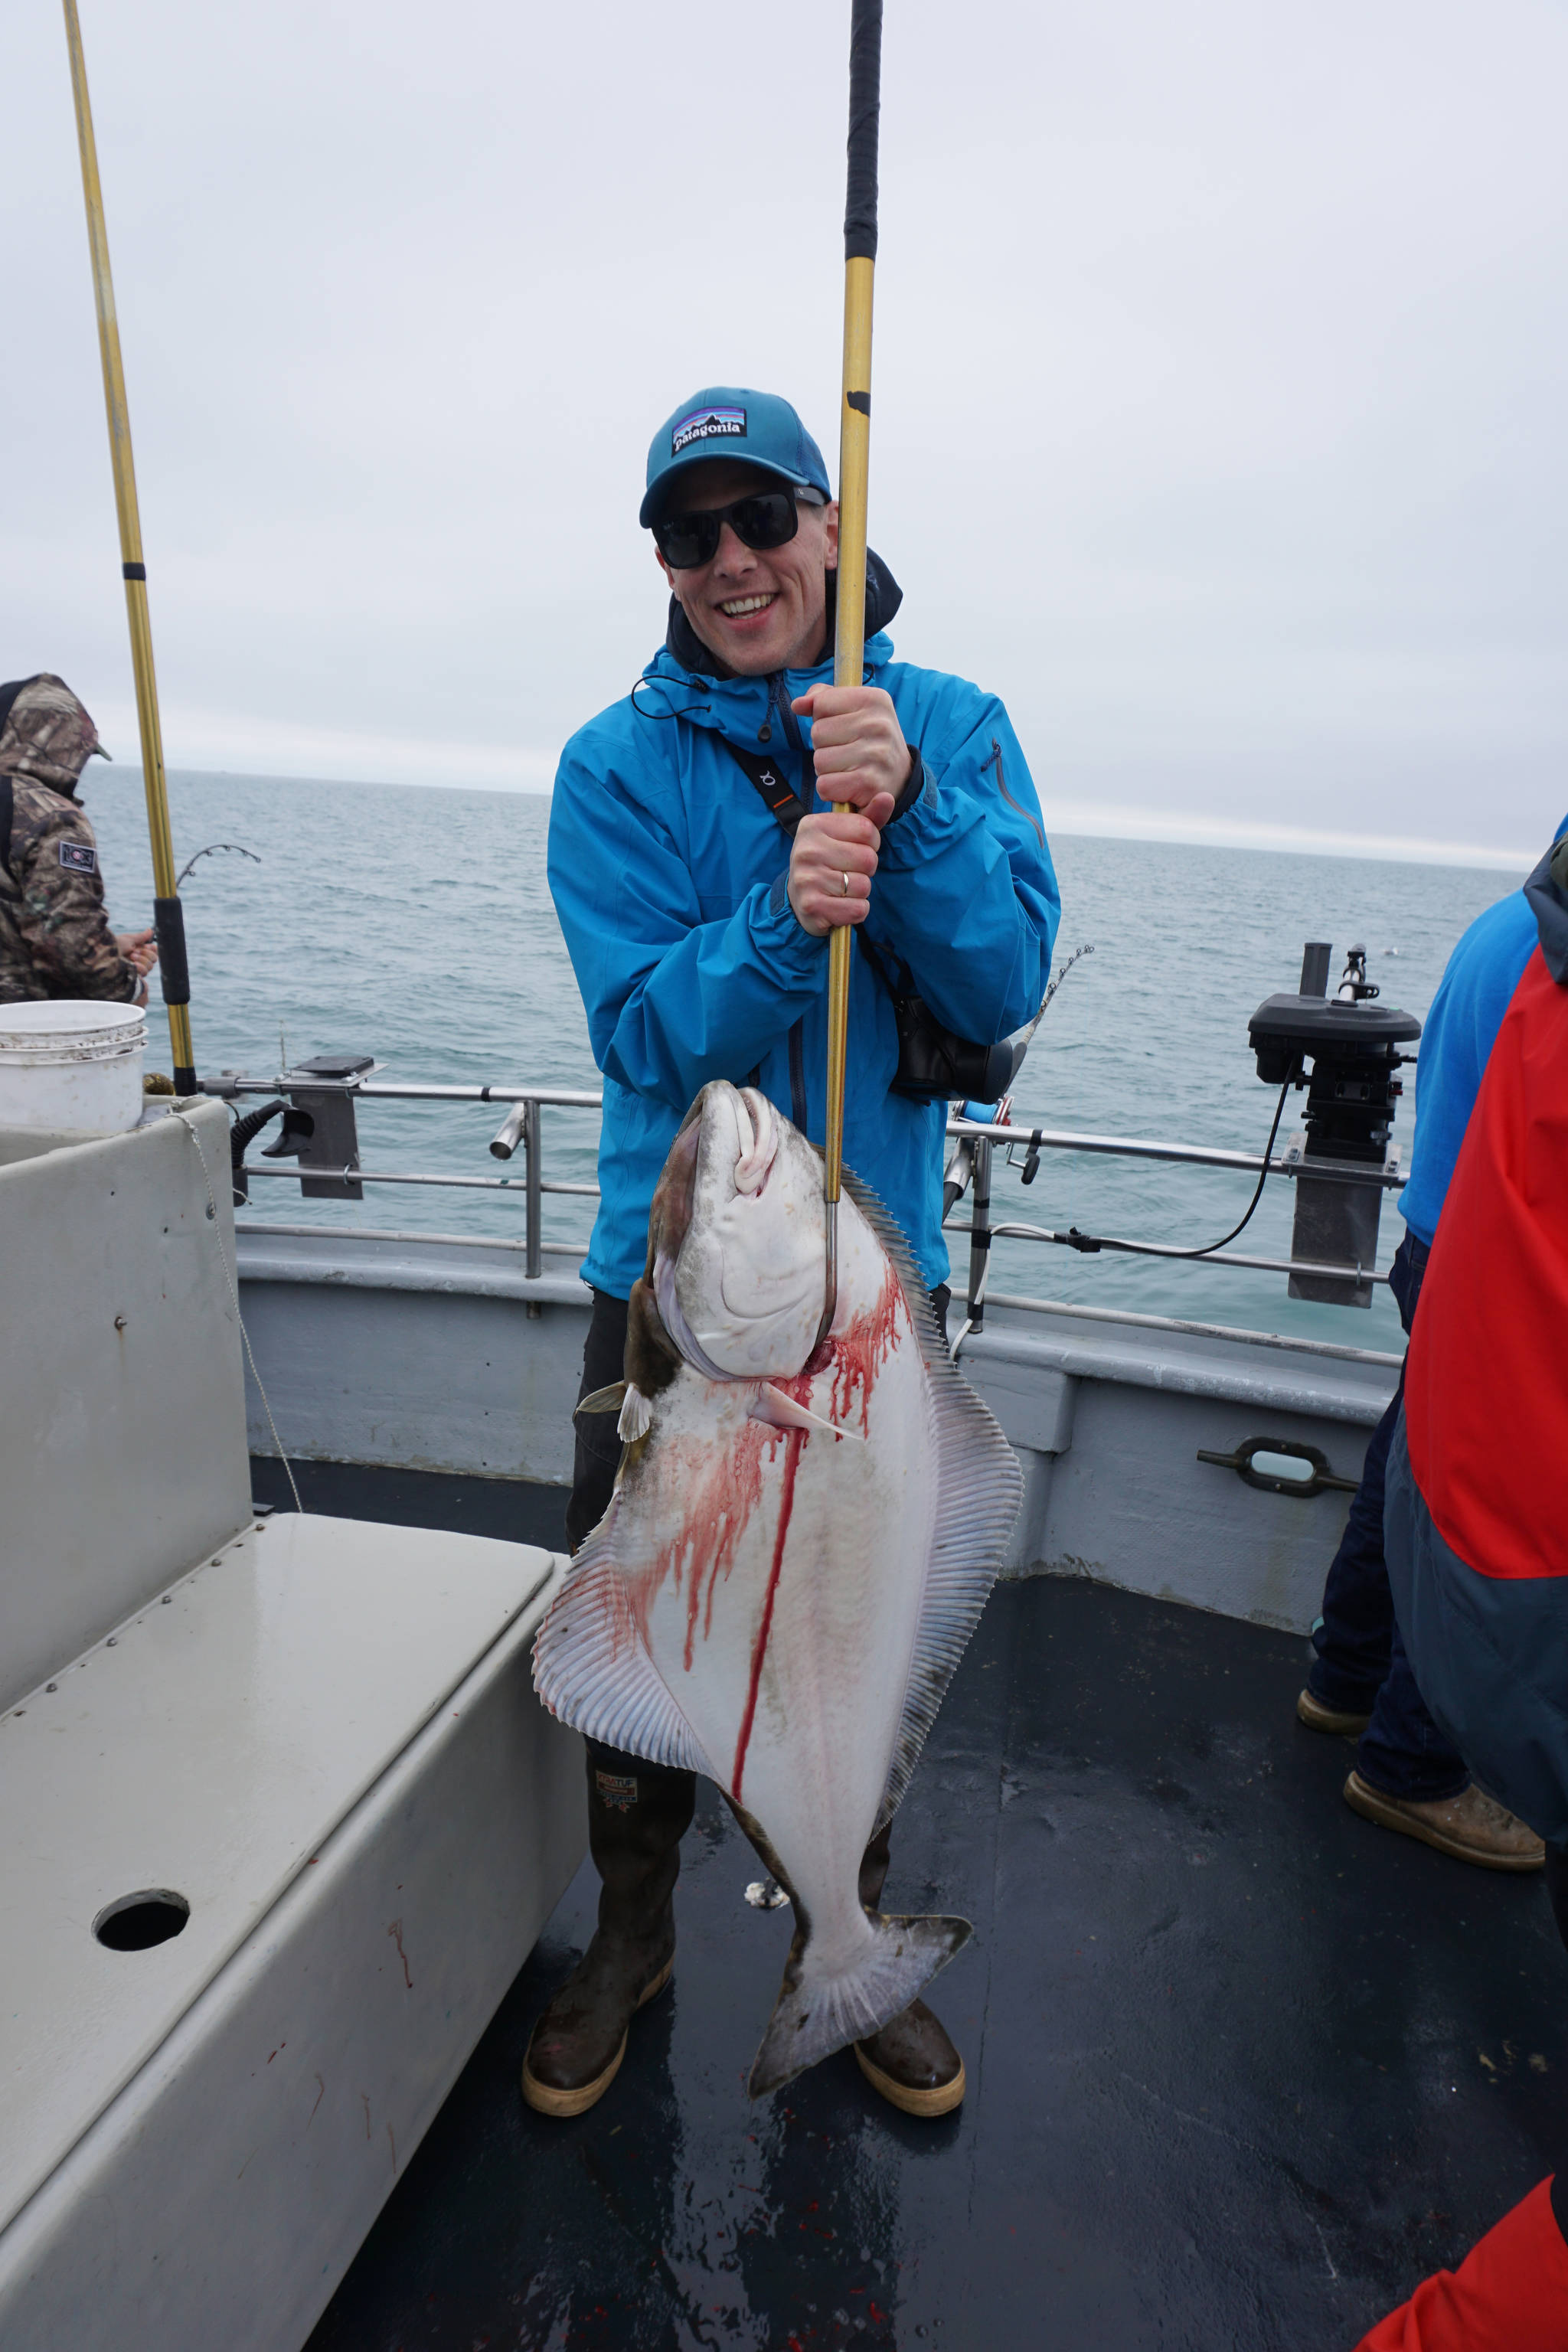 Learning from the tourists: halibut fishing is a heck of a lot of